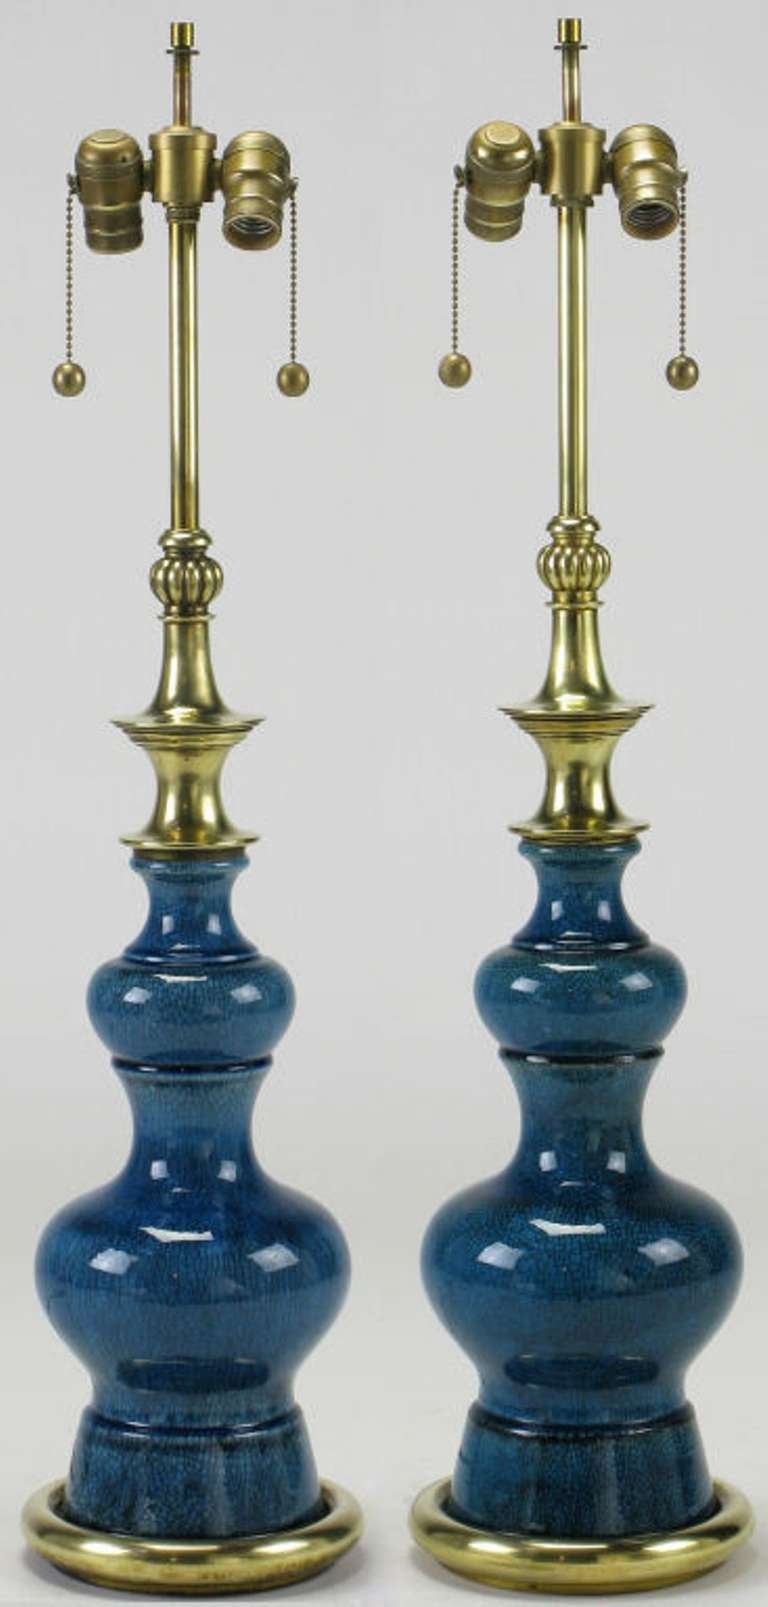 Beautifully crackle glazed blue ceramic bodied table lamps by Stiffel. Solid brass pagoda style spacers with ribbed melon form cap. Solid brass stem and double sockets with ball and chain pull switches. Sold sans shades.